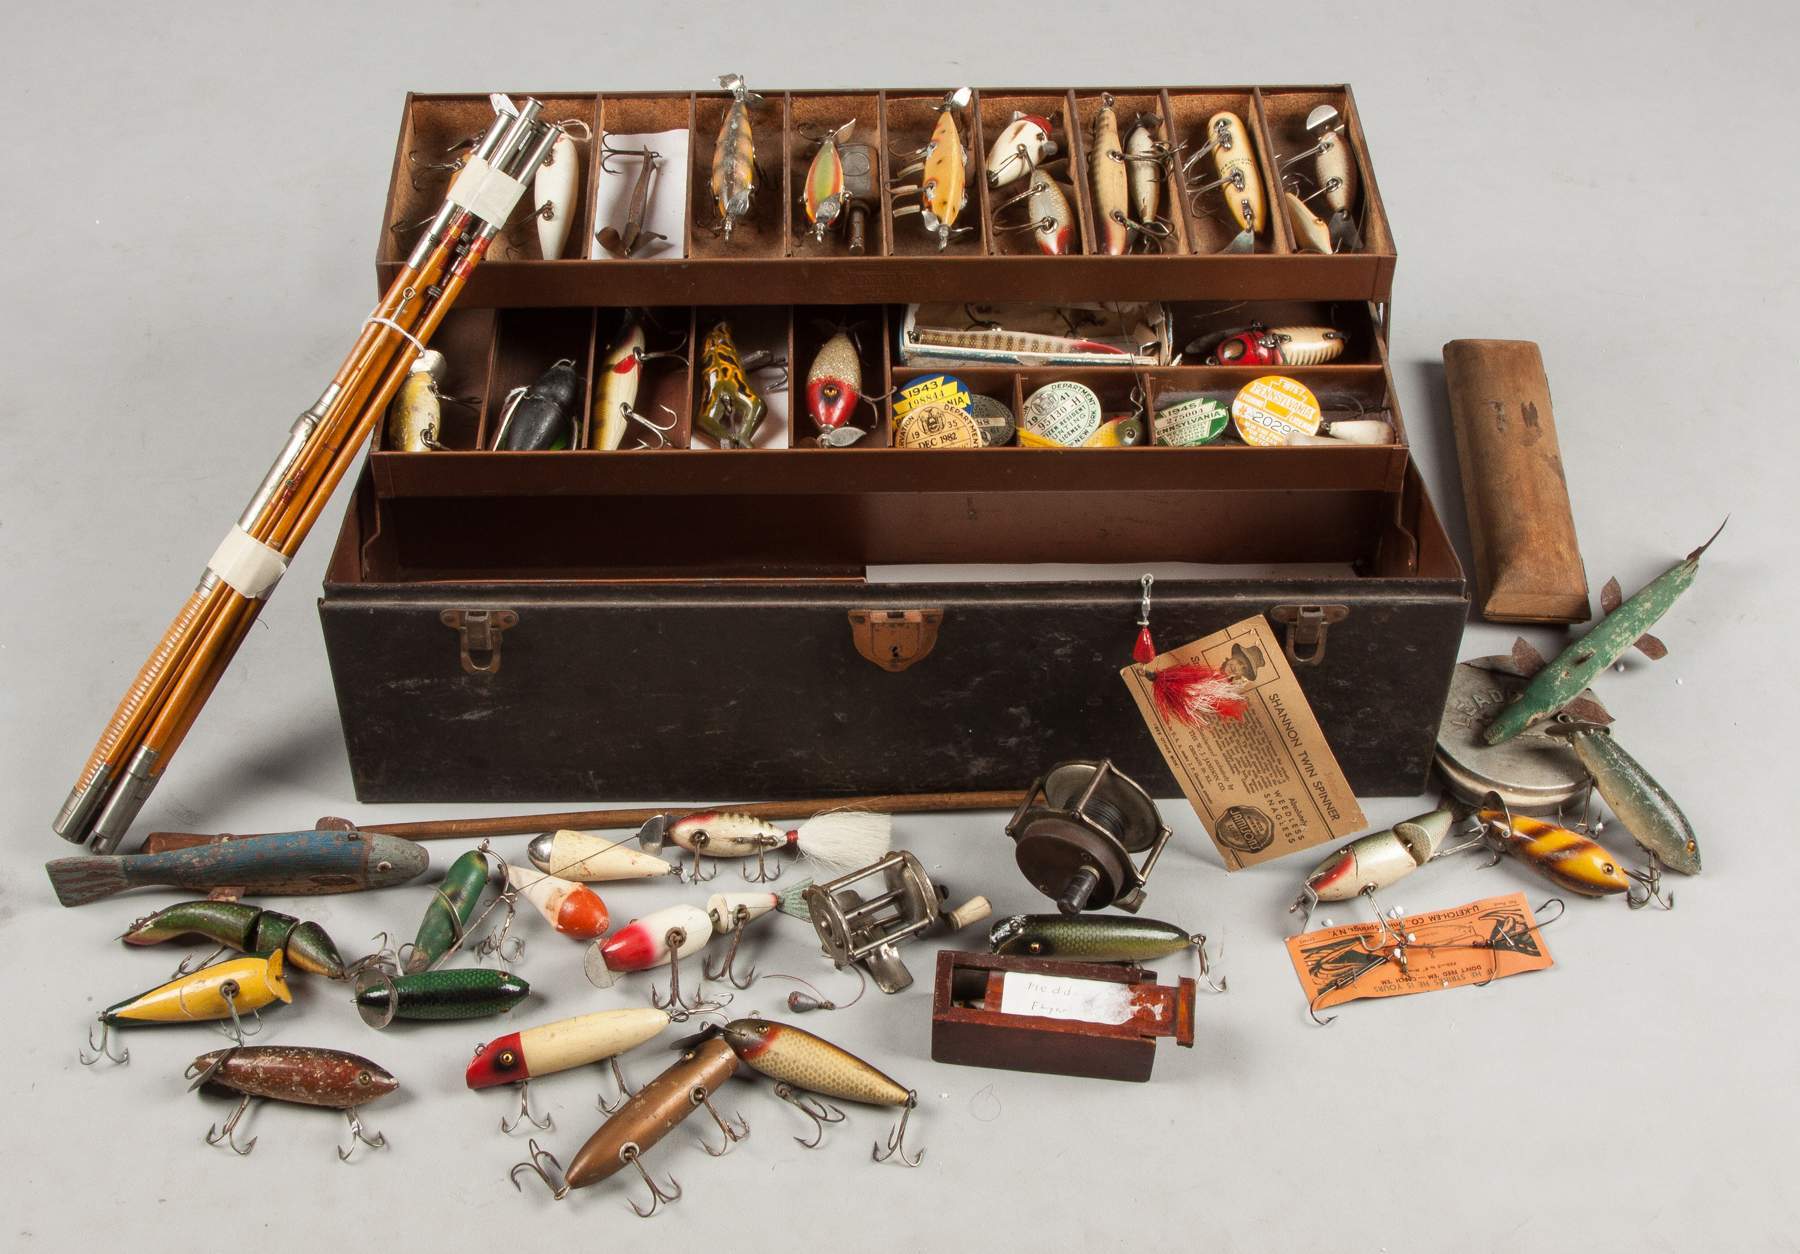 Vintage Fishing Equipment – What's So Alluring?